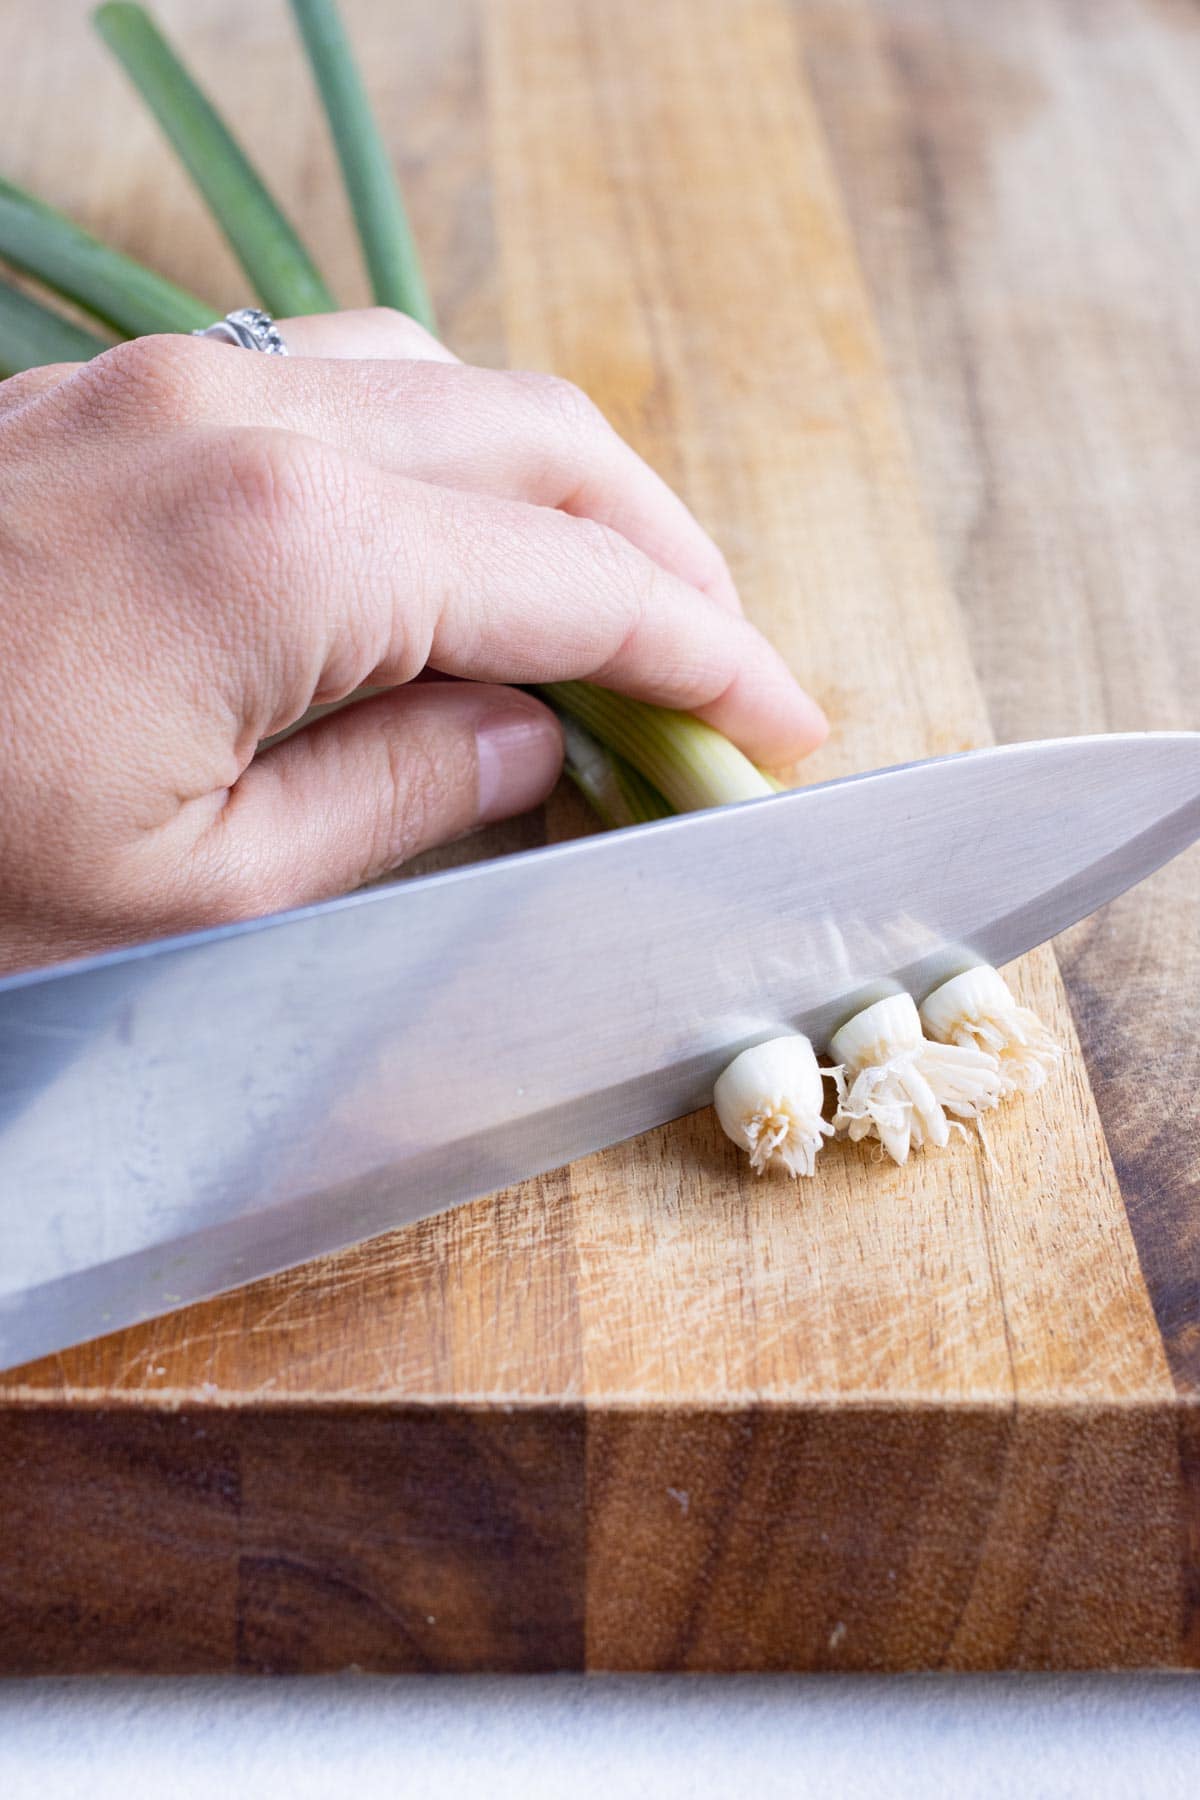 A knife is used to remove the stem from the green onions.